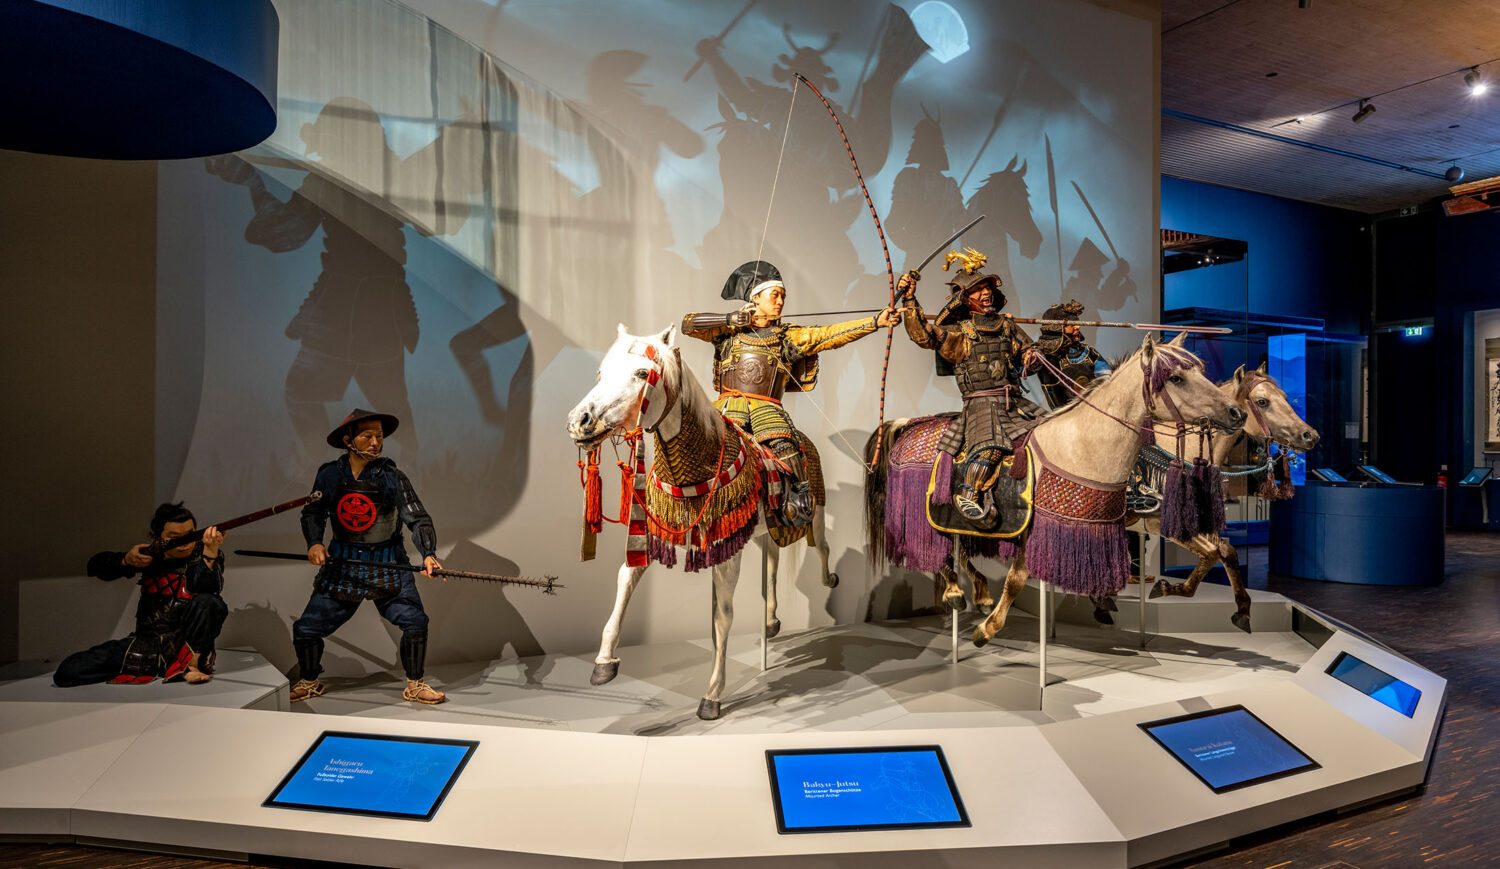 How the samurai fought - in Berlin you can experience it interactively and innovatively